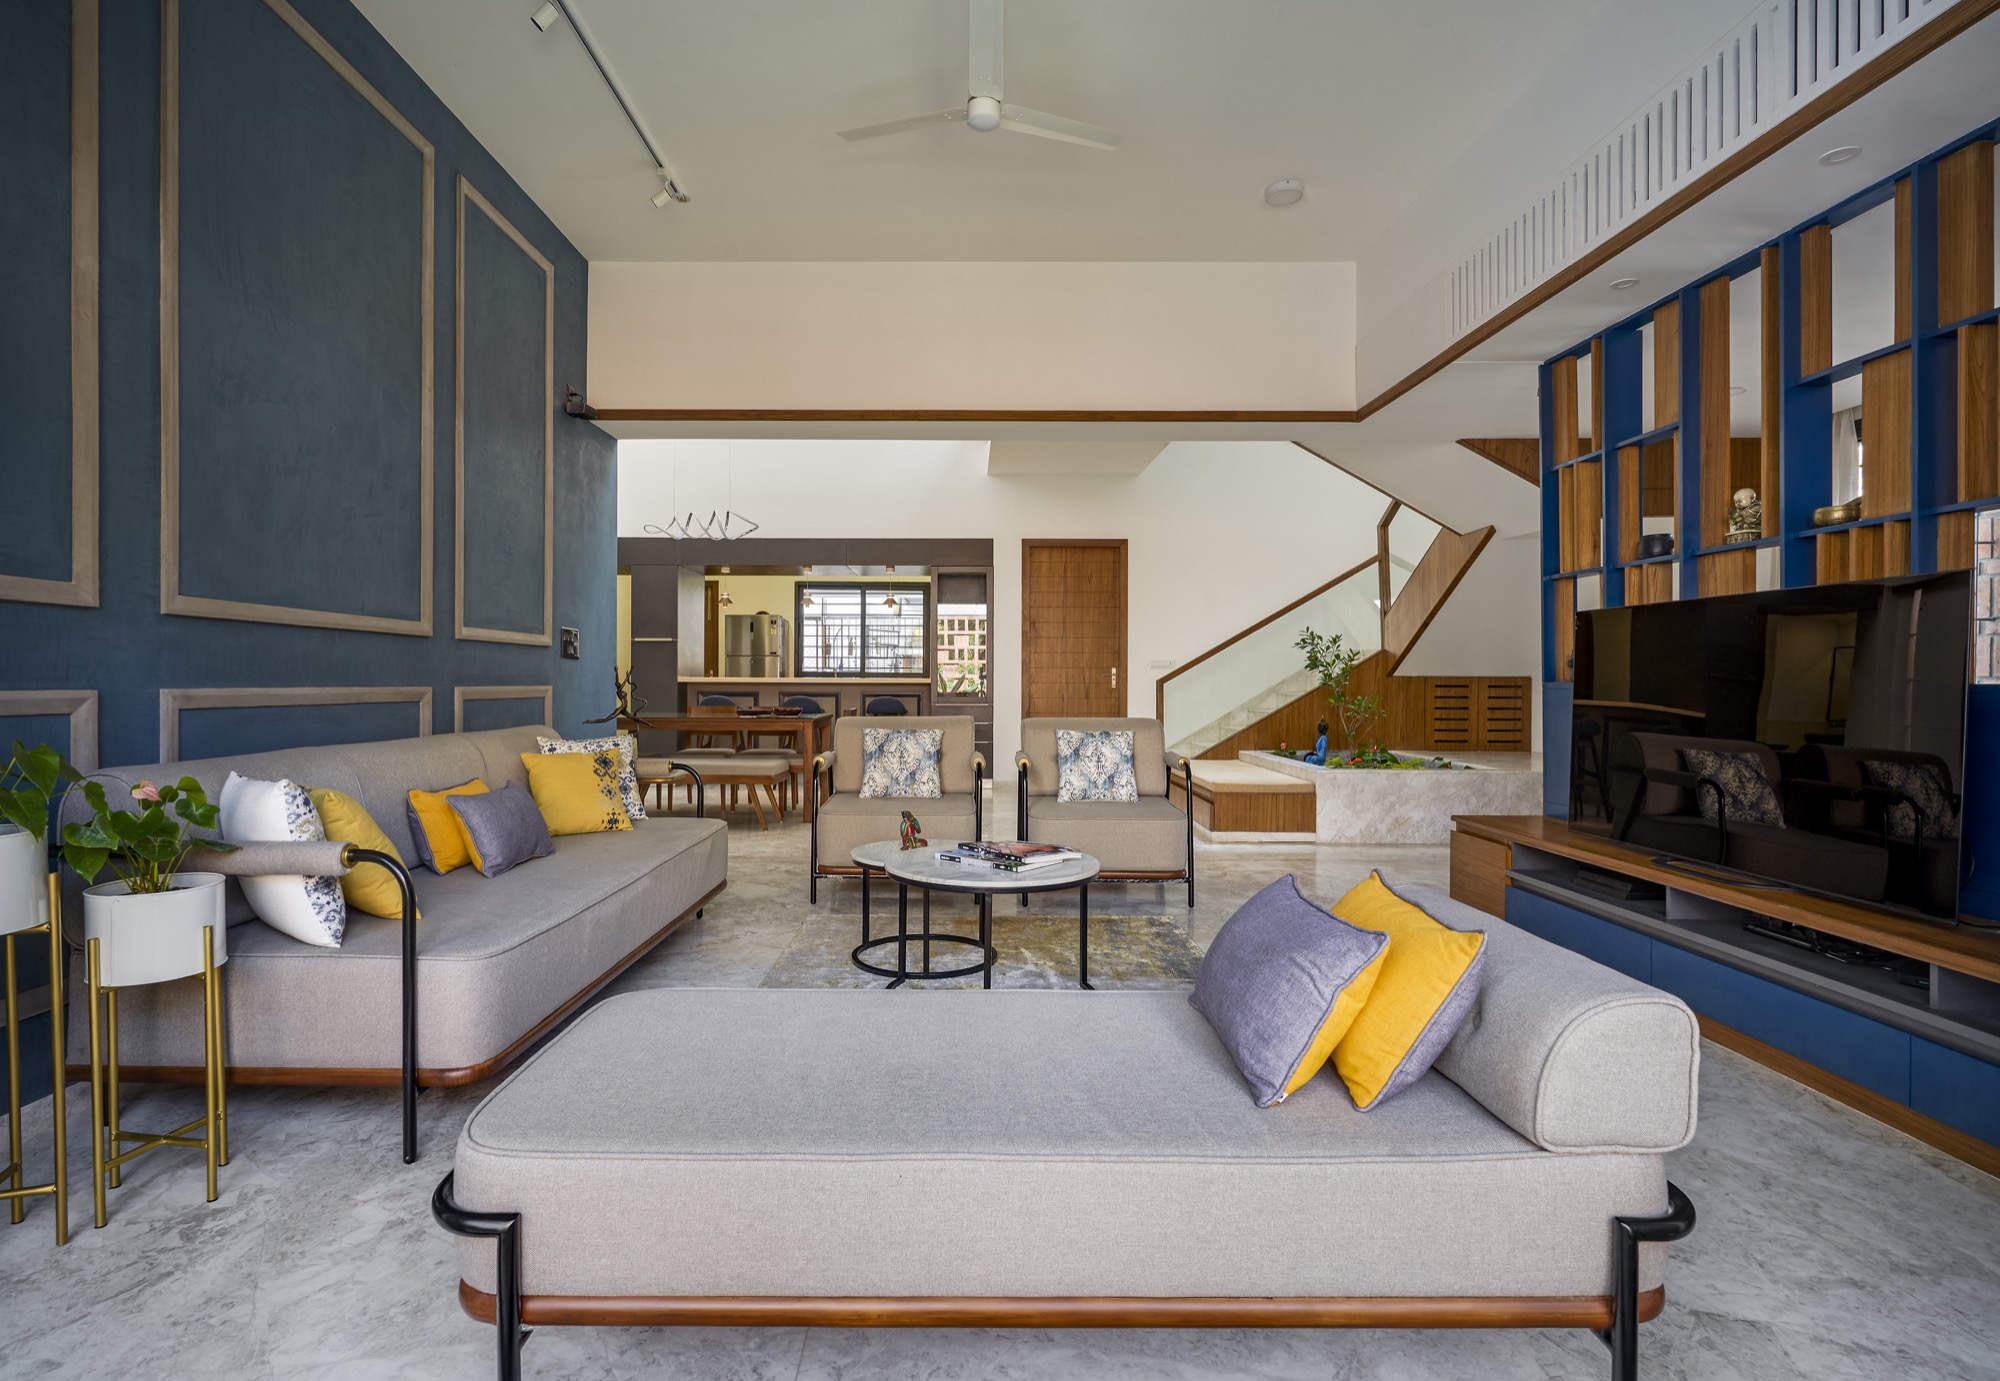 Cuckoo’s Nest, at Bangalore by Between Spaces Architects 18